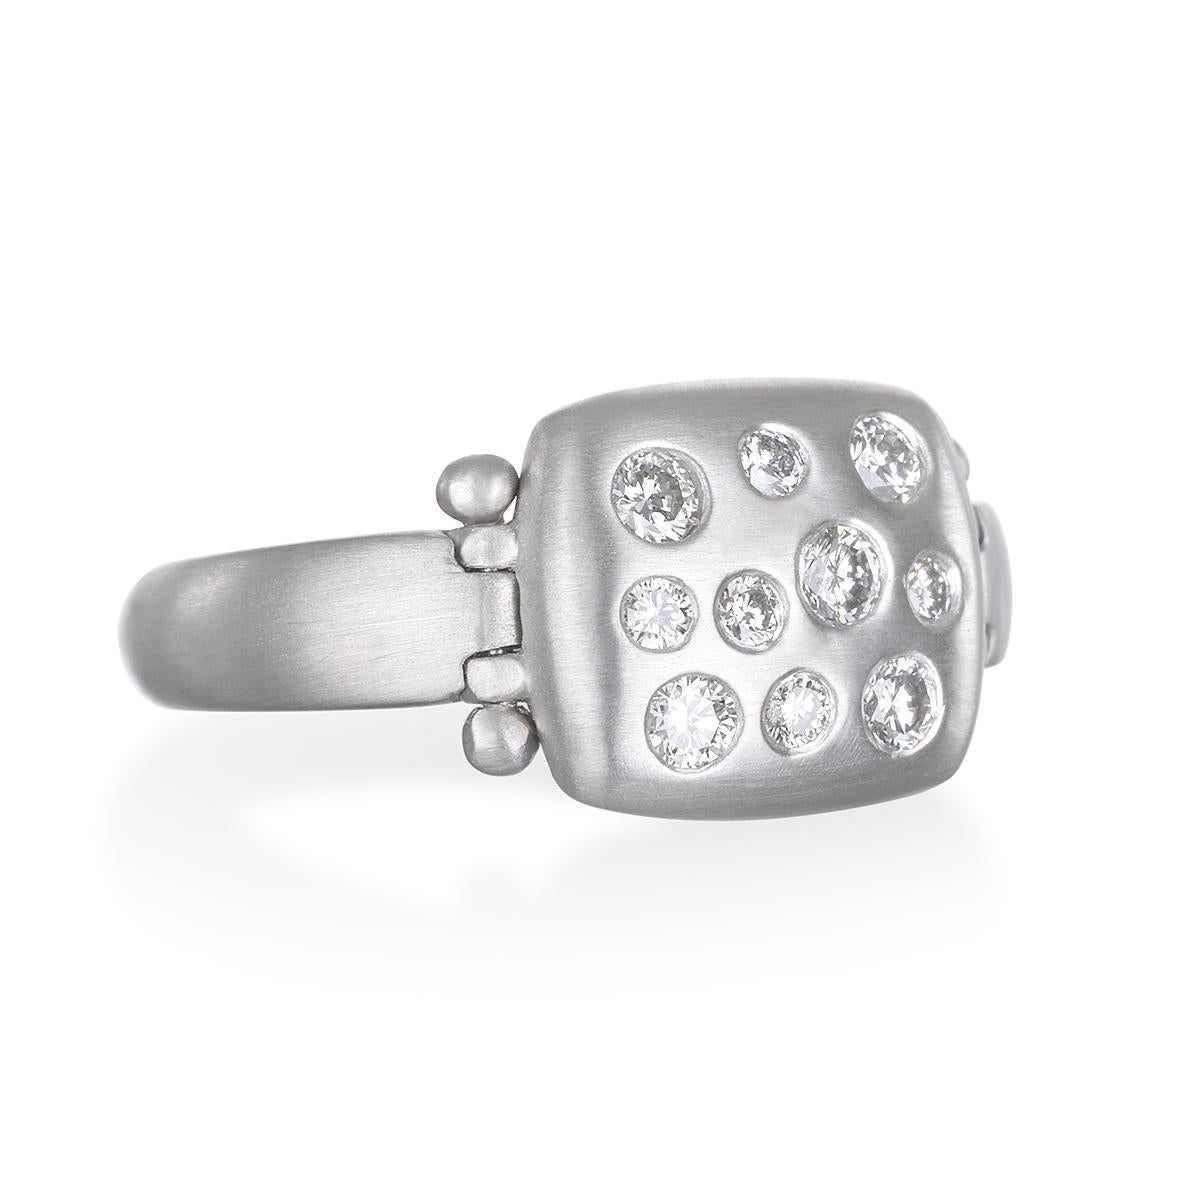 A modern-day take on the Signet Ring, Faye Kim's Platinum Diamond Hinged Chiclet Ring sparkles with burnished bright, white diamonds. With its flattering chiclet or antique cushion shape, it's a great look worn on any finger and can be stacked with